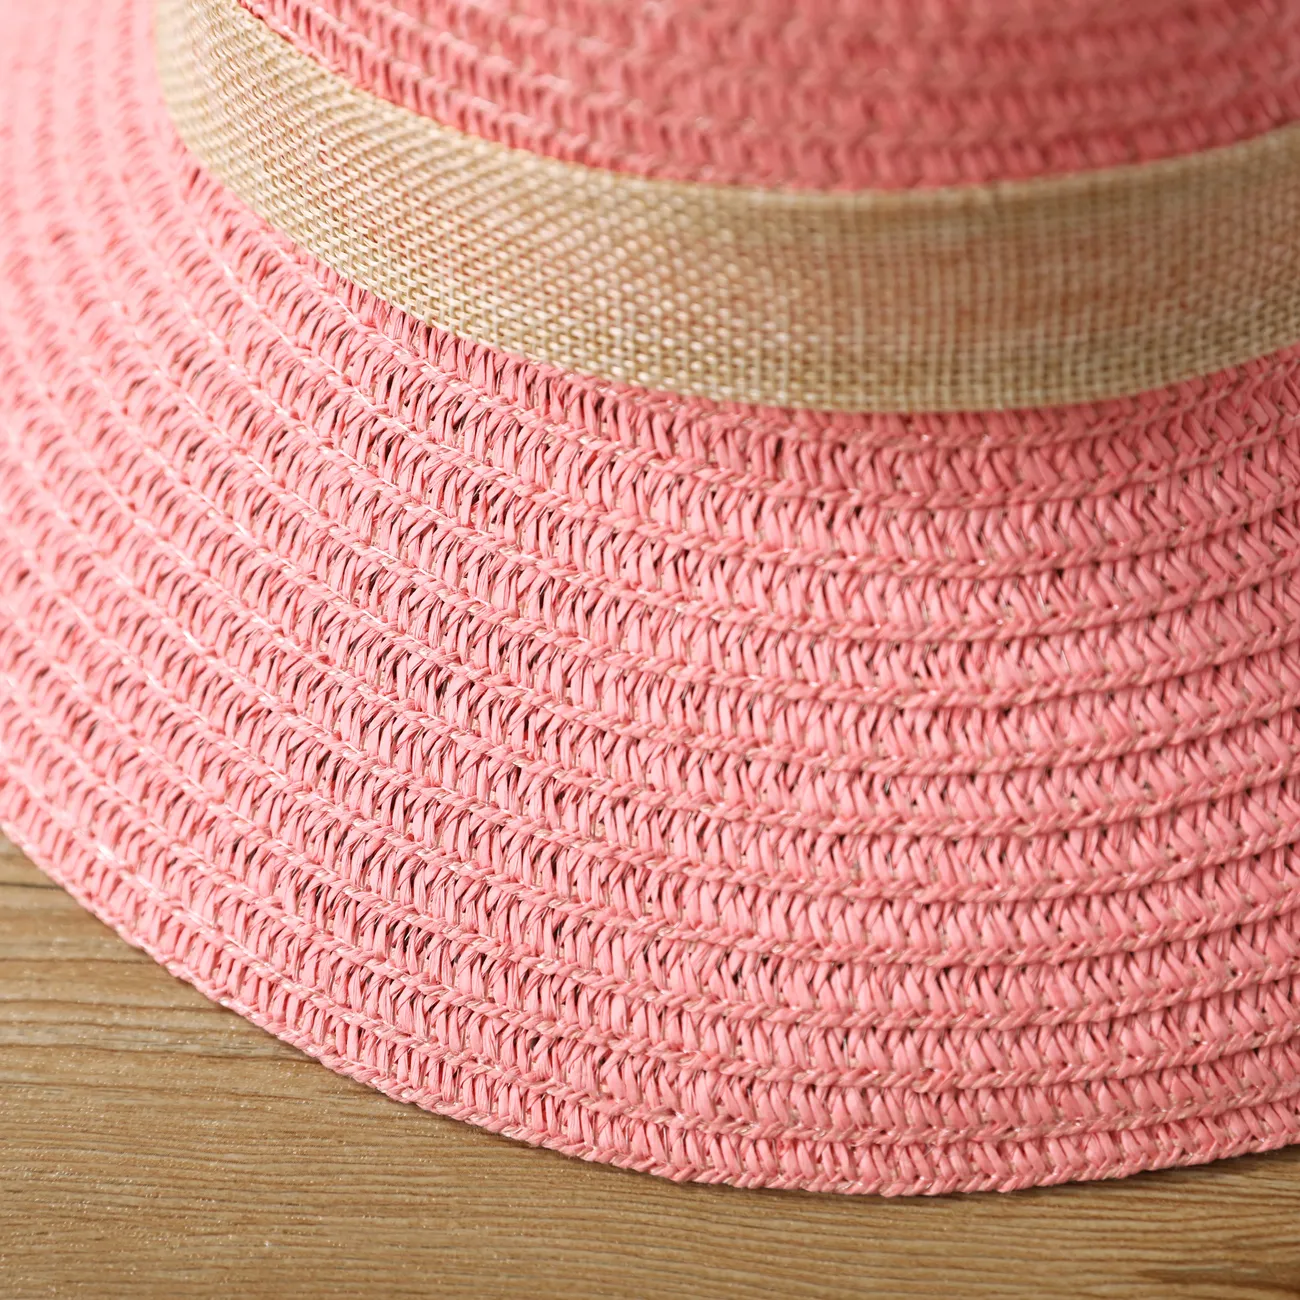 Summer Sun Hat for Girls with Bowknot and Rolled Brim, Straw Beach Hat for Travel and Vacation Pink big image 1